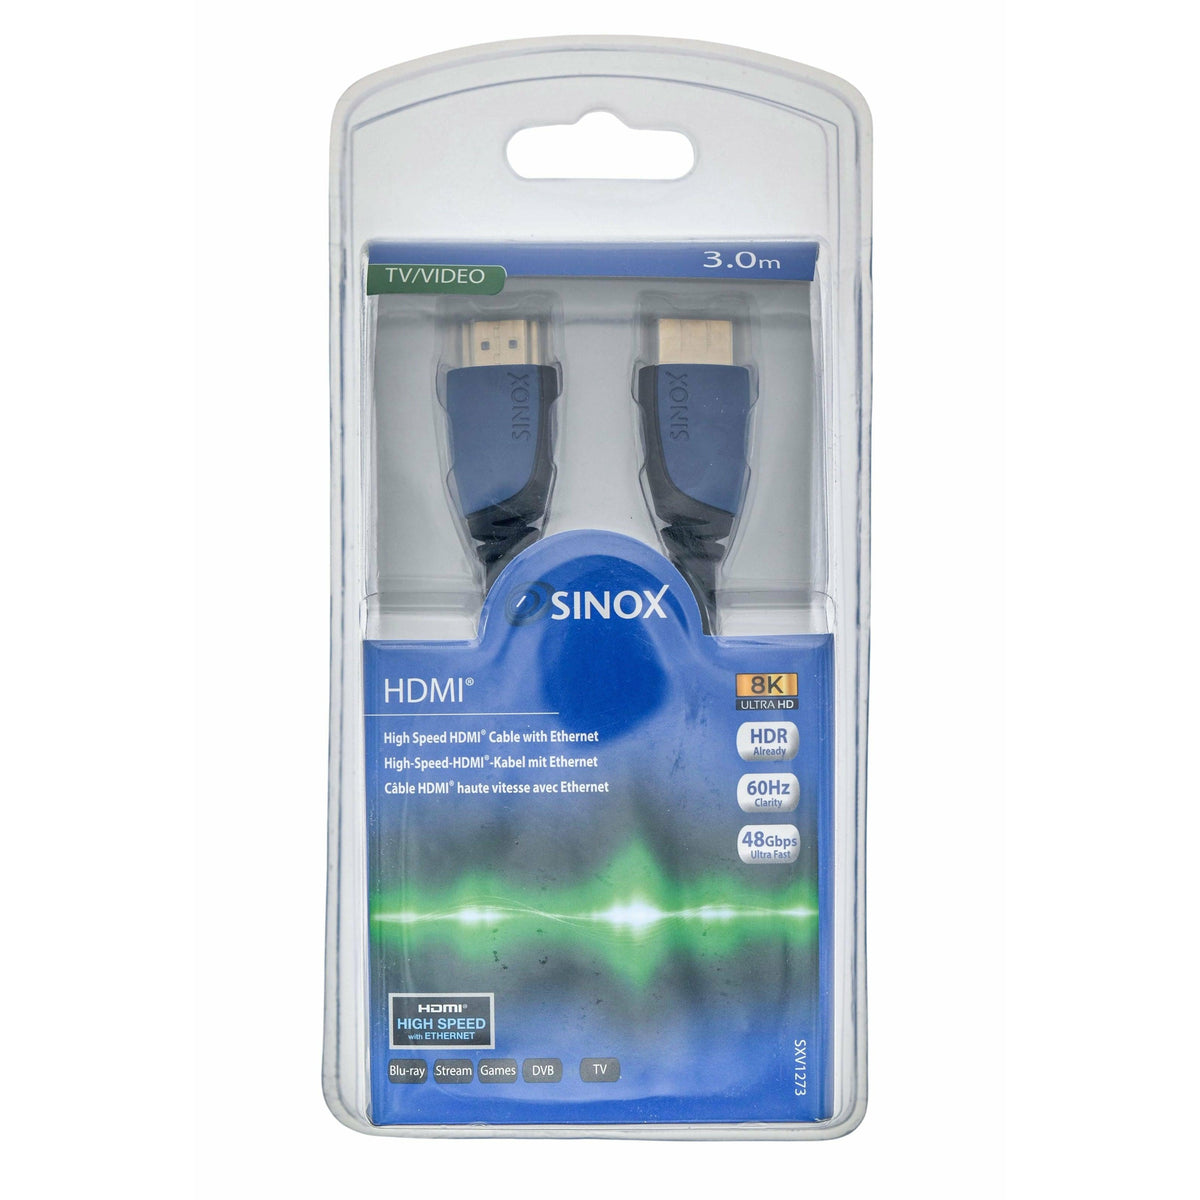 Sinox 3M 8K Gold Plated HDR HDMI Cable - Blue | XV1273 (7451069841596)